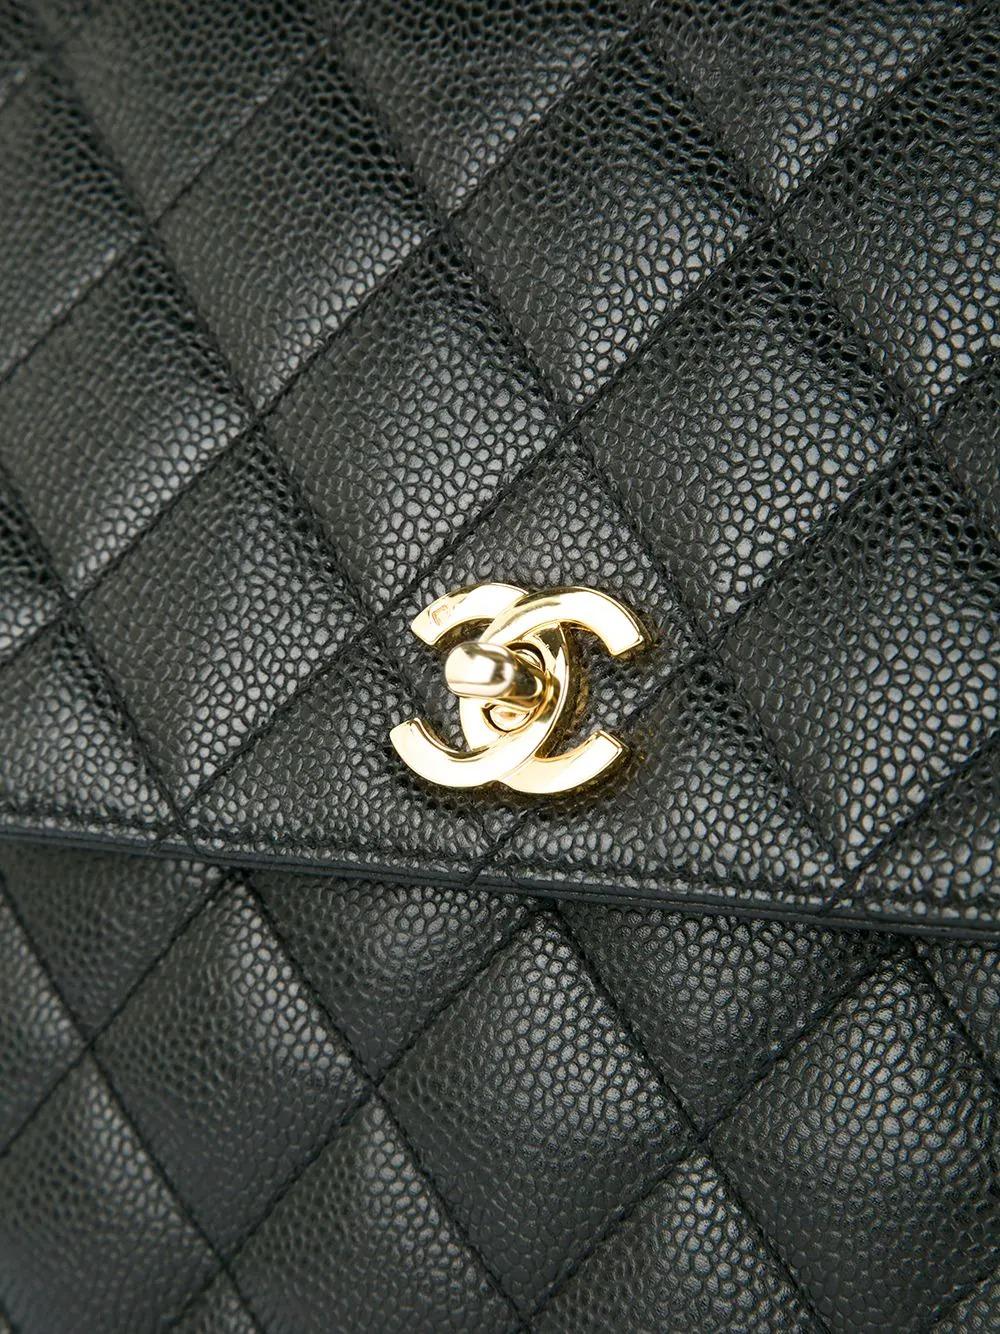 Chanel 2001 Jumbo Vintage Caviar Quilted Satchel Top Handle Kelly Flap Bag Gold In Good Condition For Sale In Miami, FL